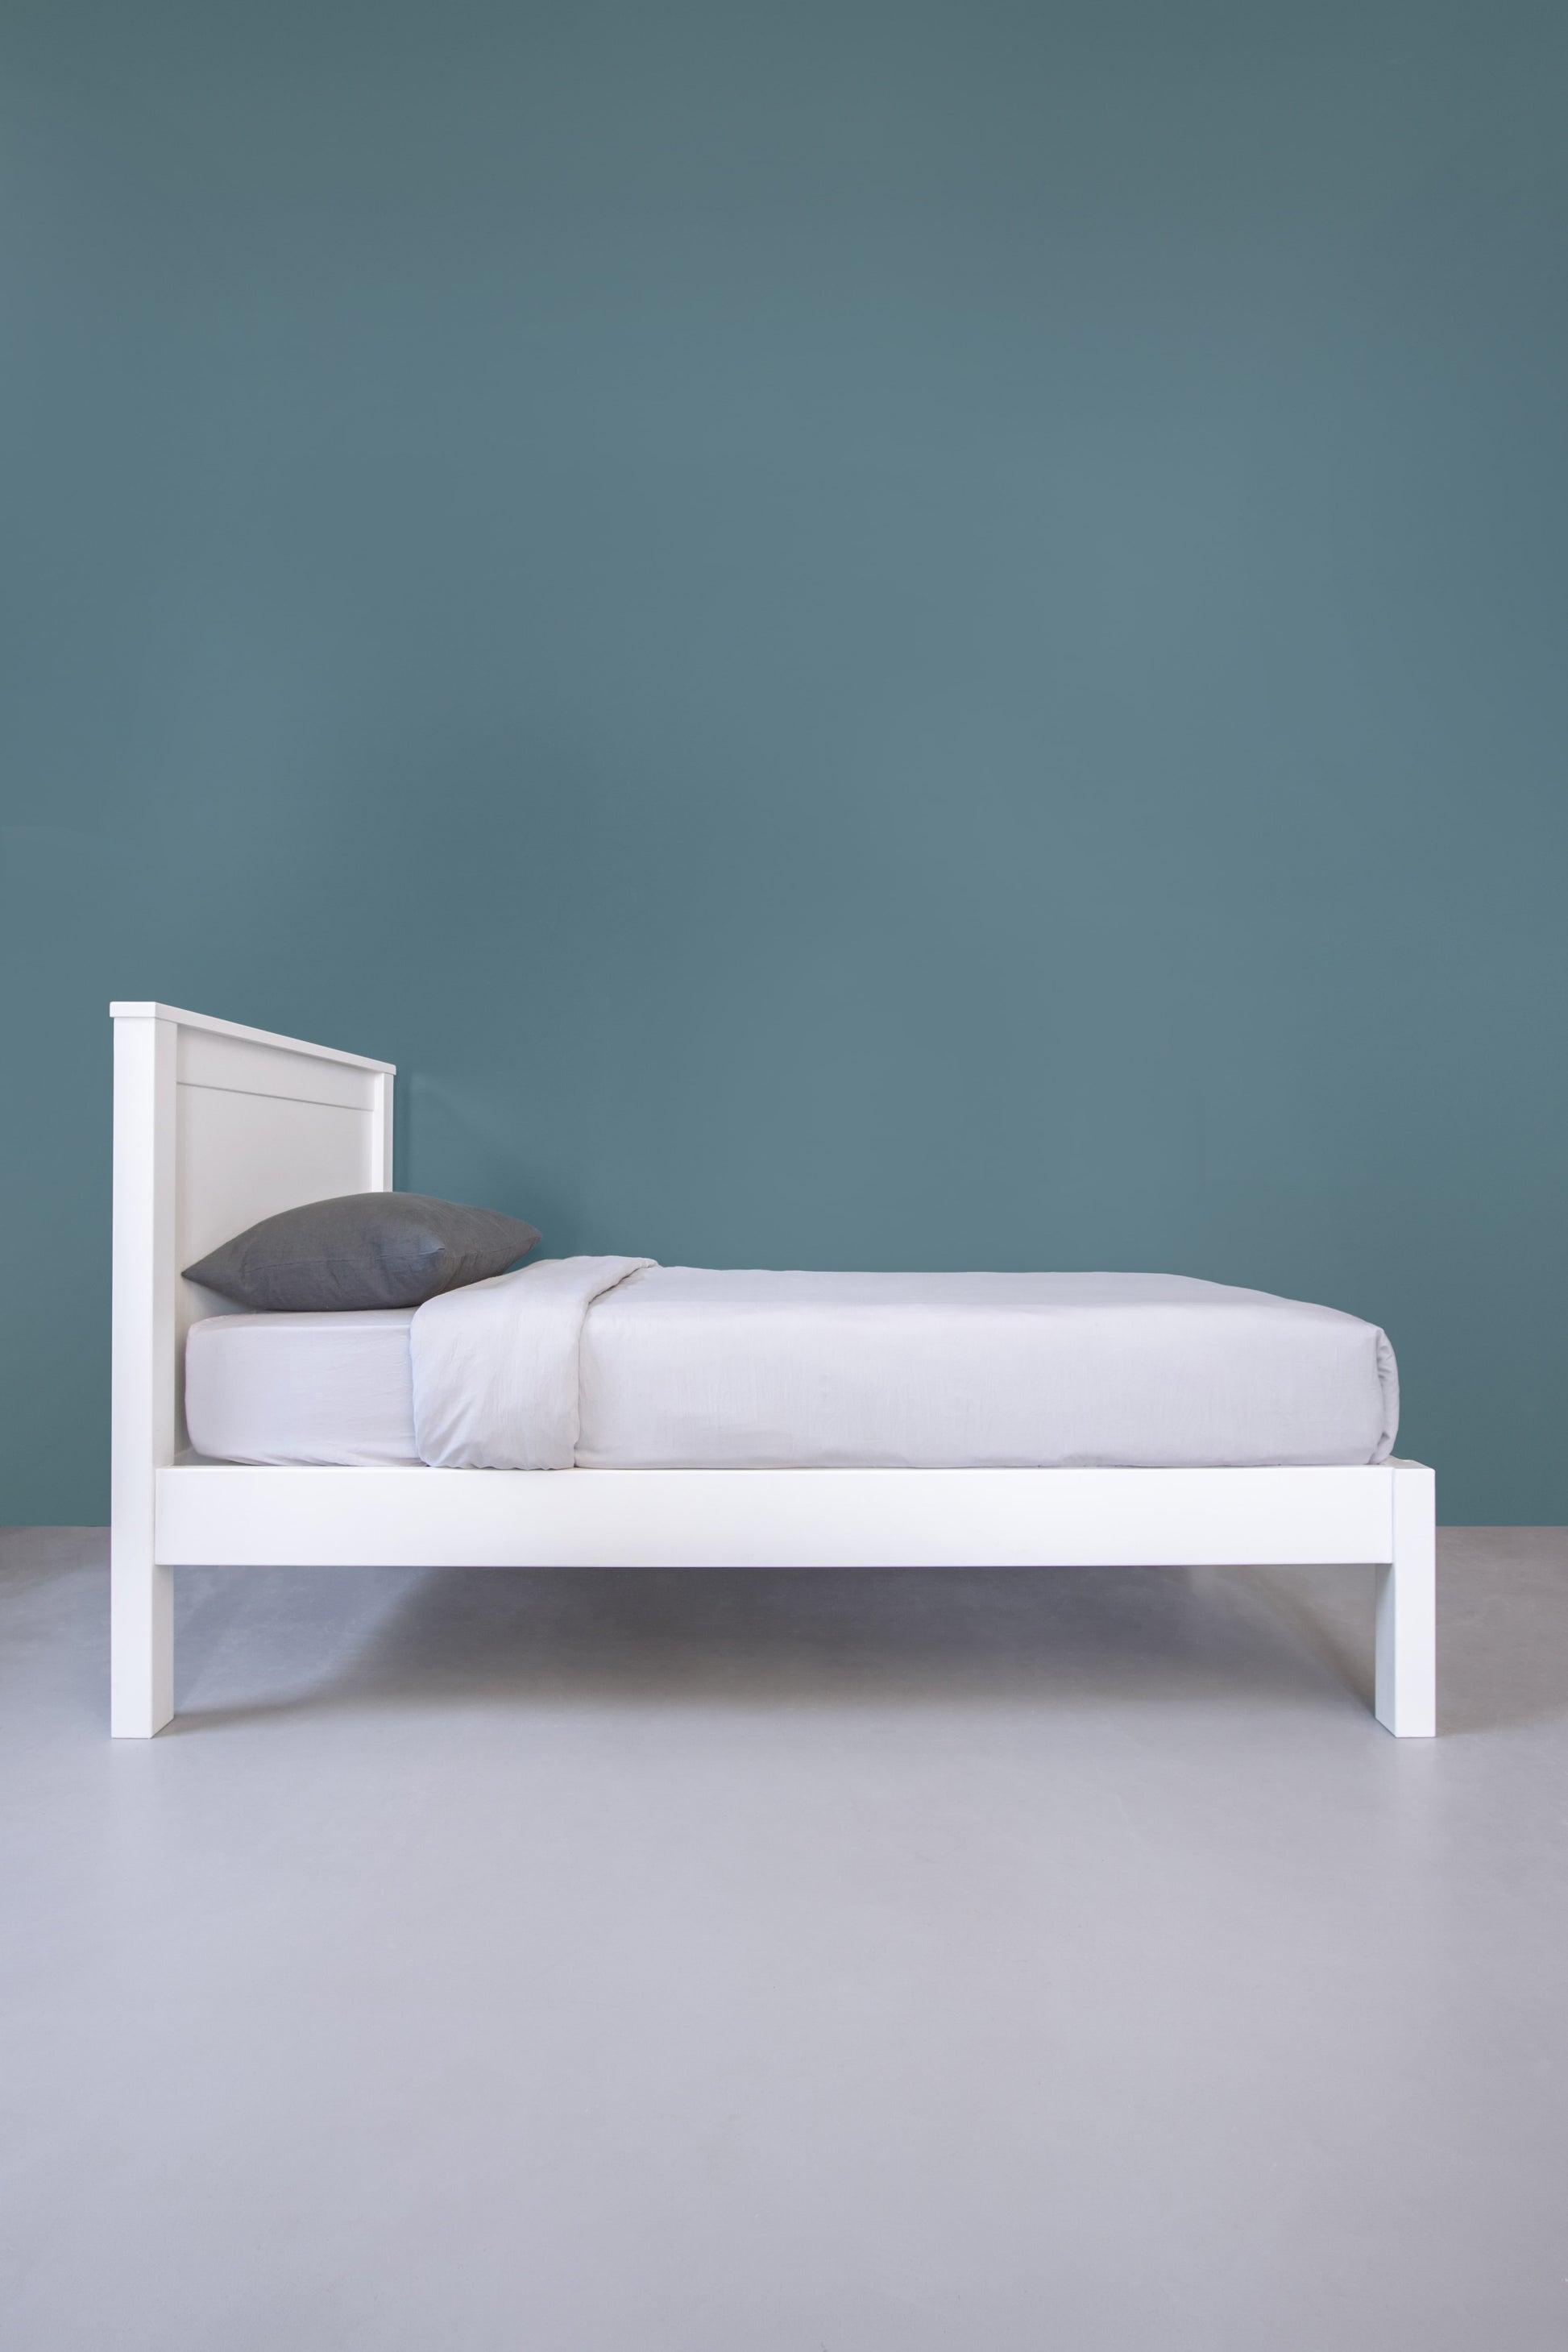 Axis classic bed - The Room